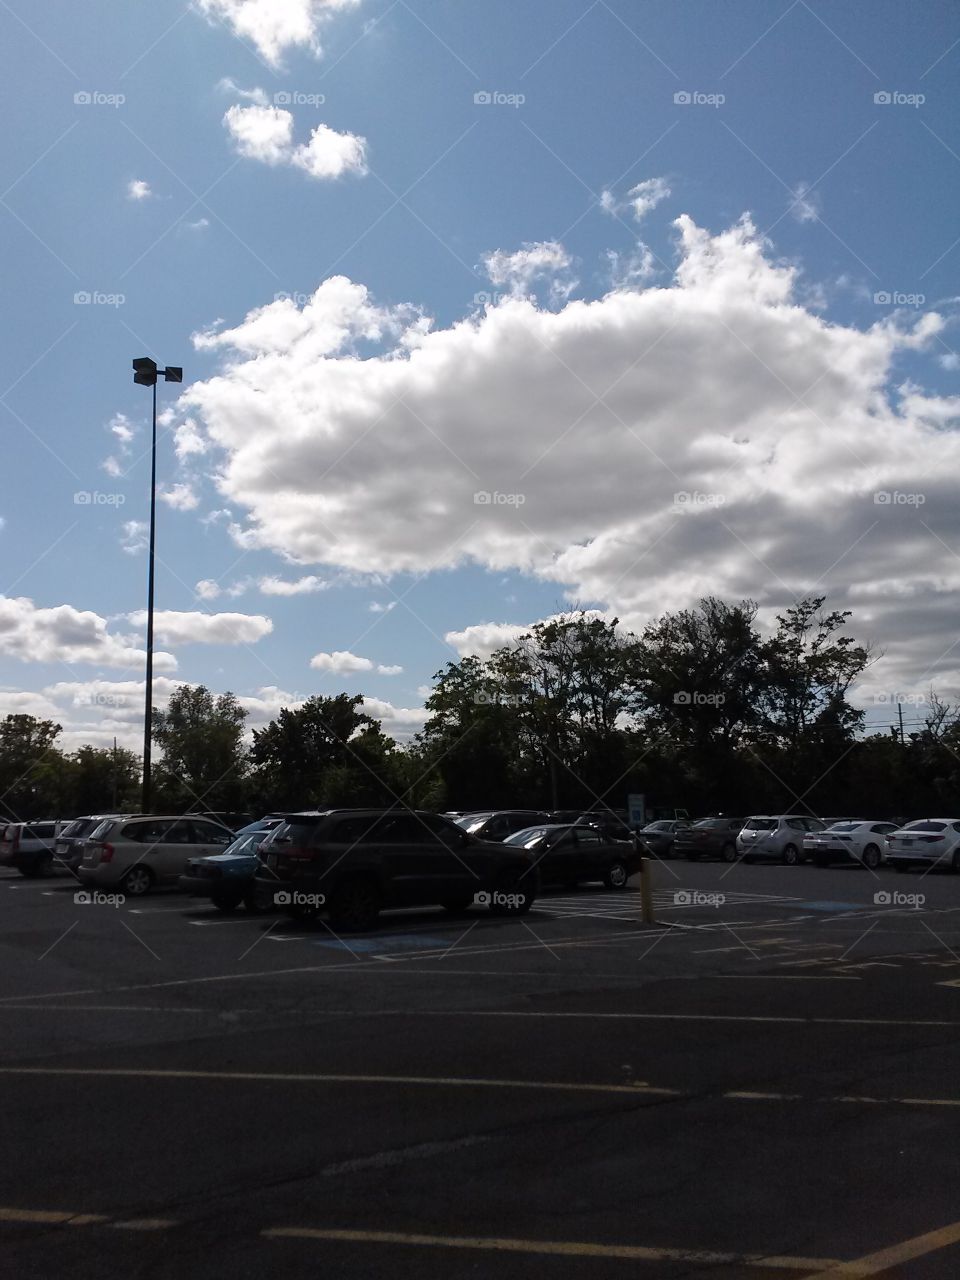 Fluffy clouds over parking lot